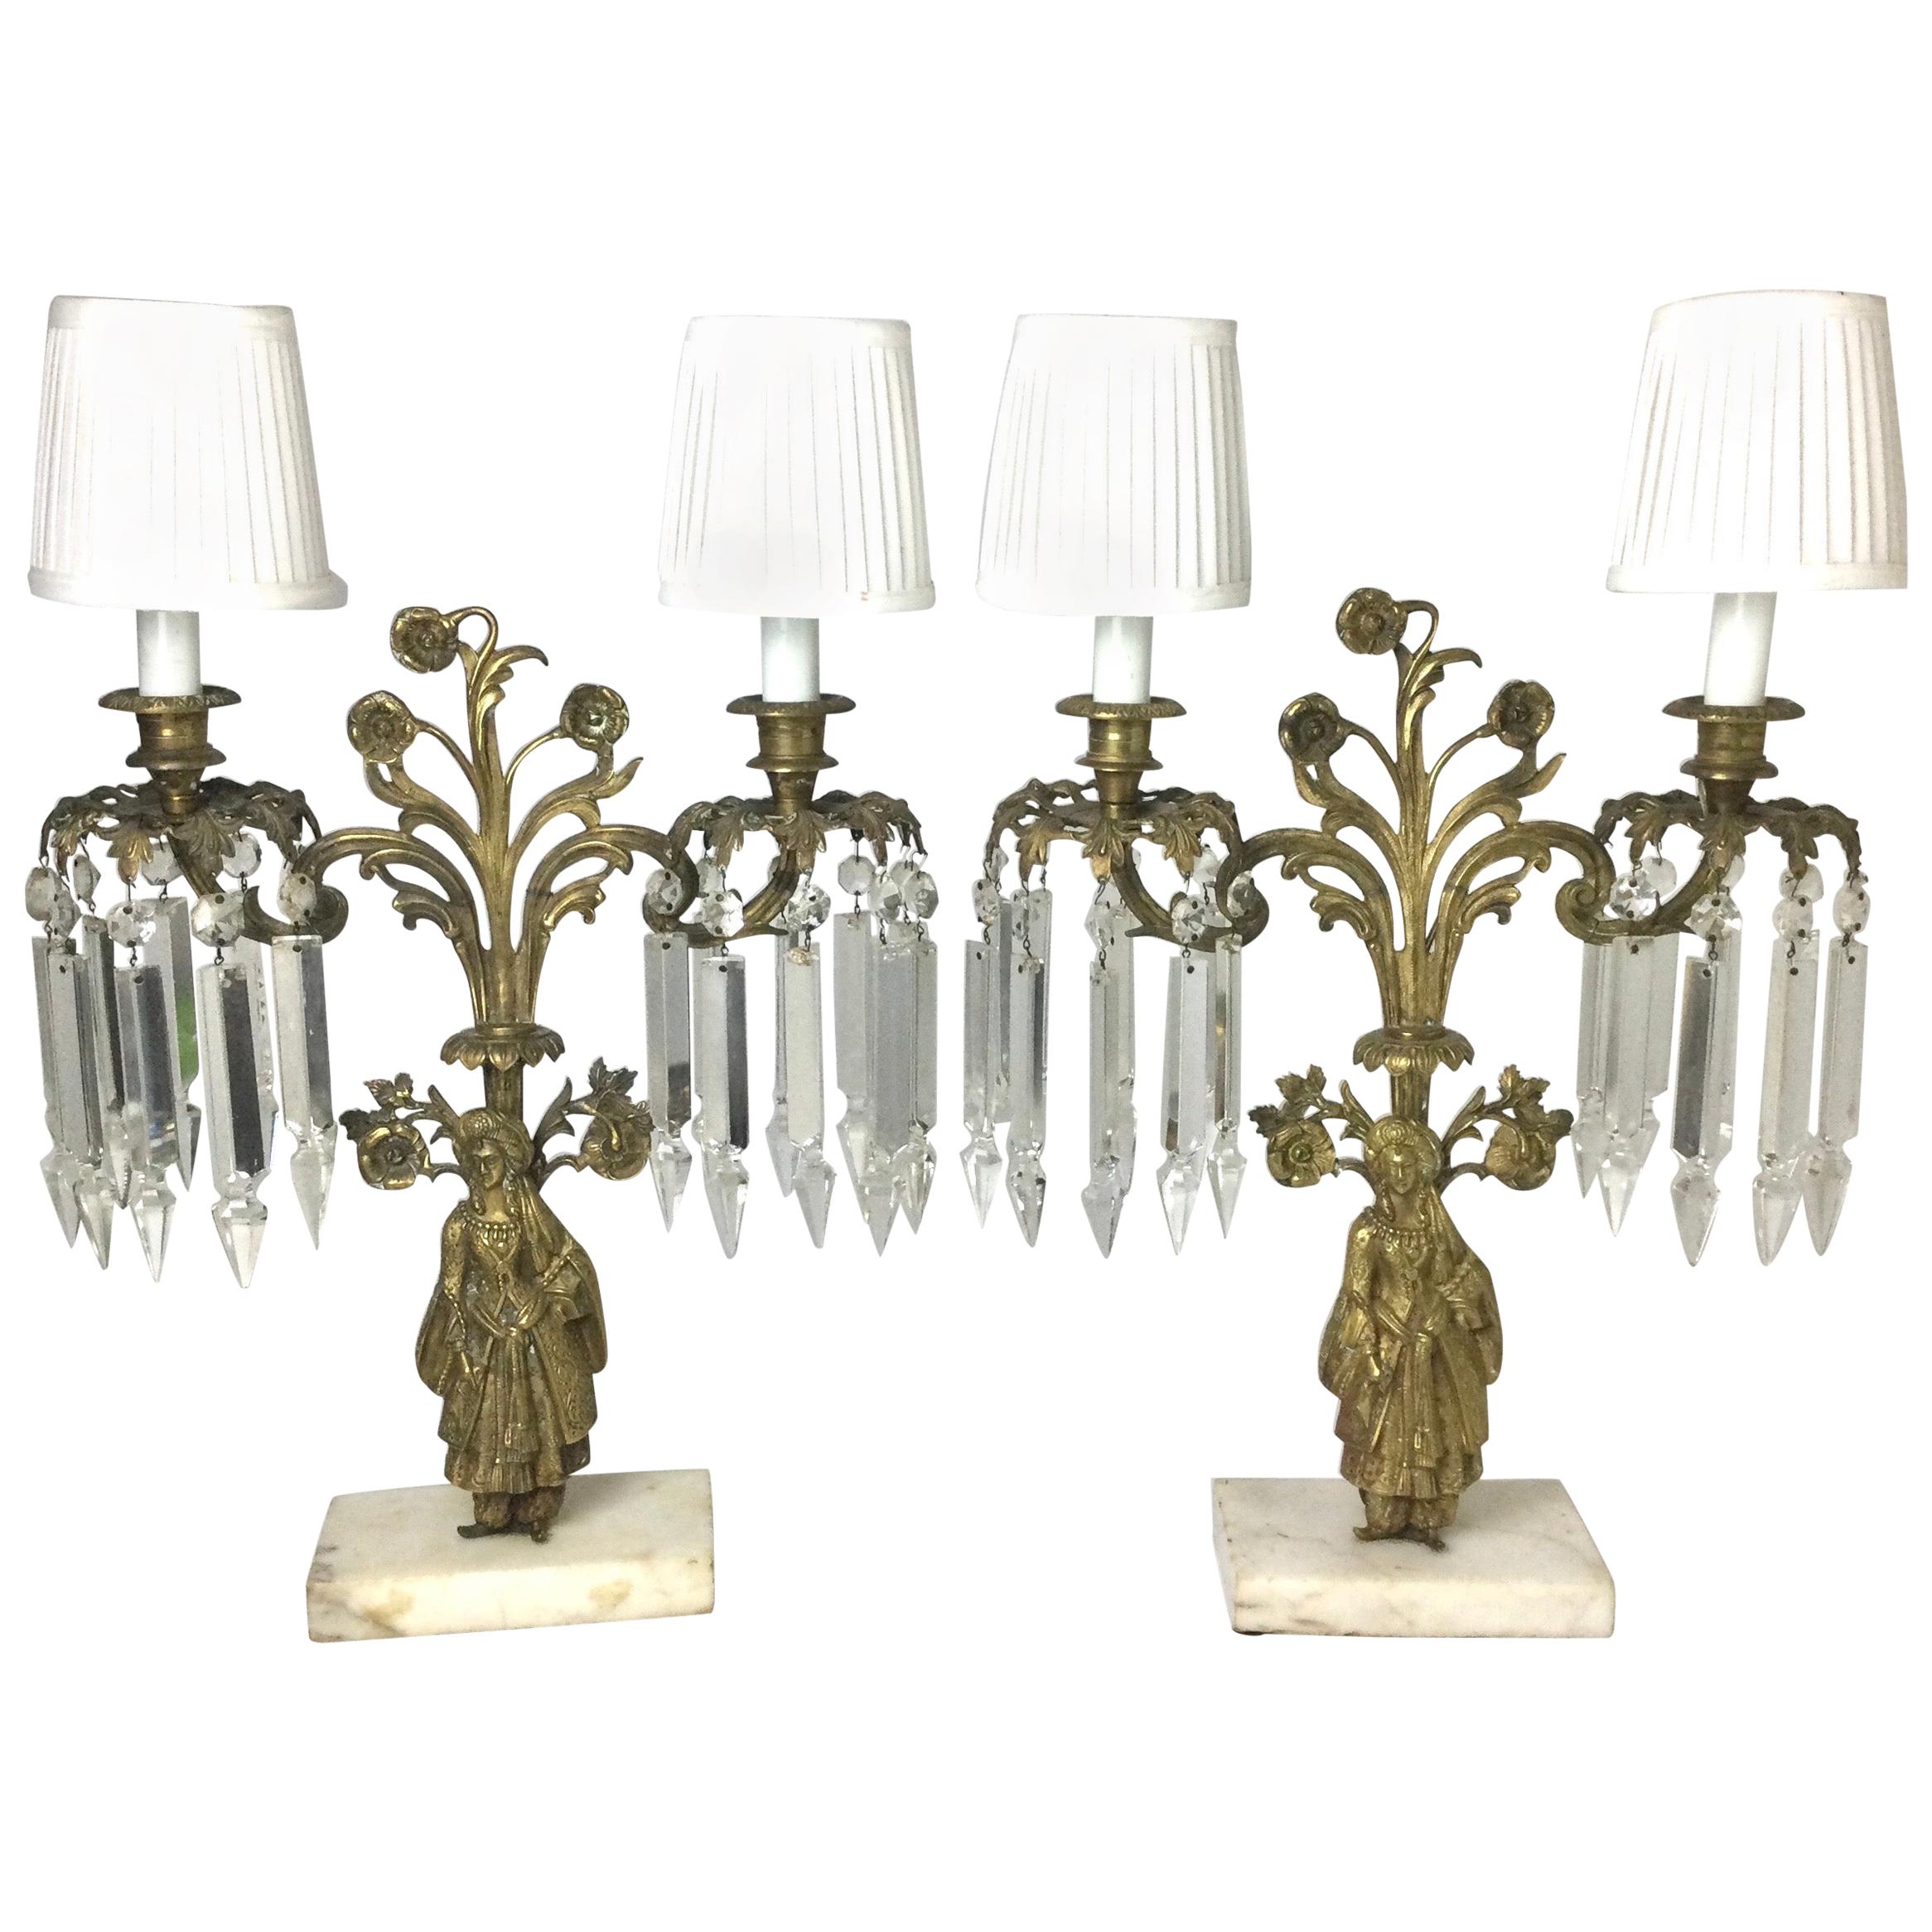 Pair of  Brass Figural Candelabra Lamps with Prisms